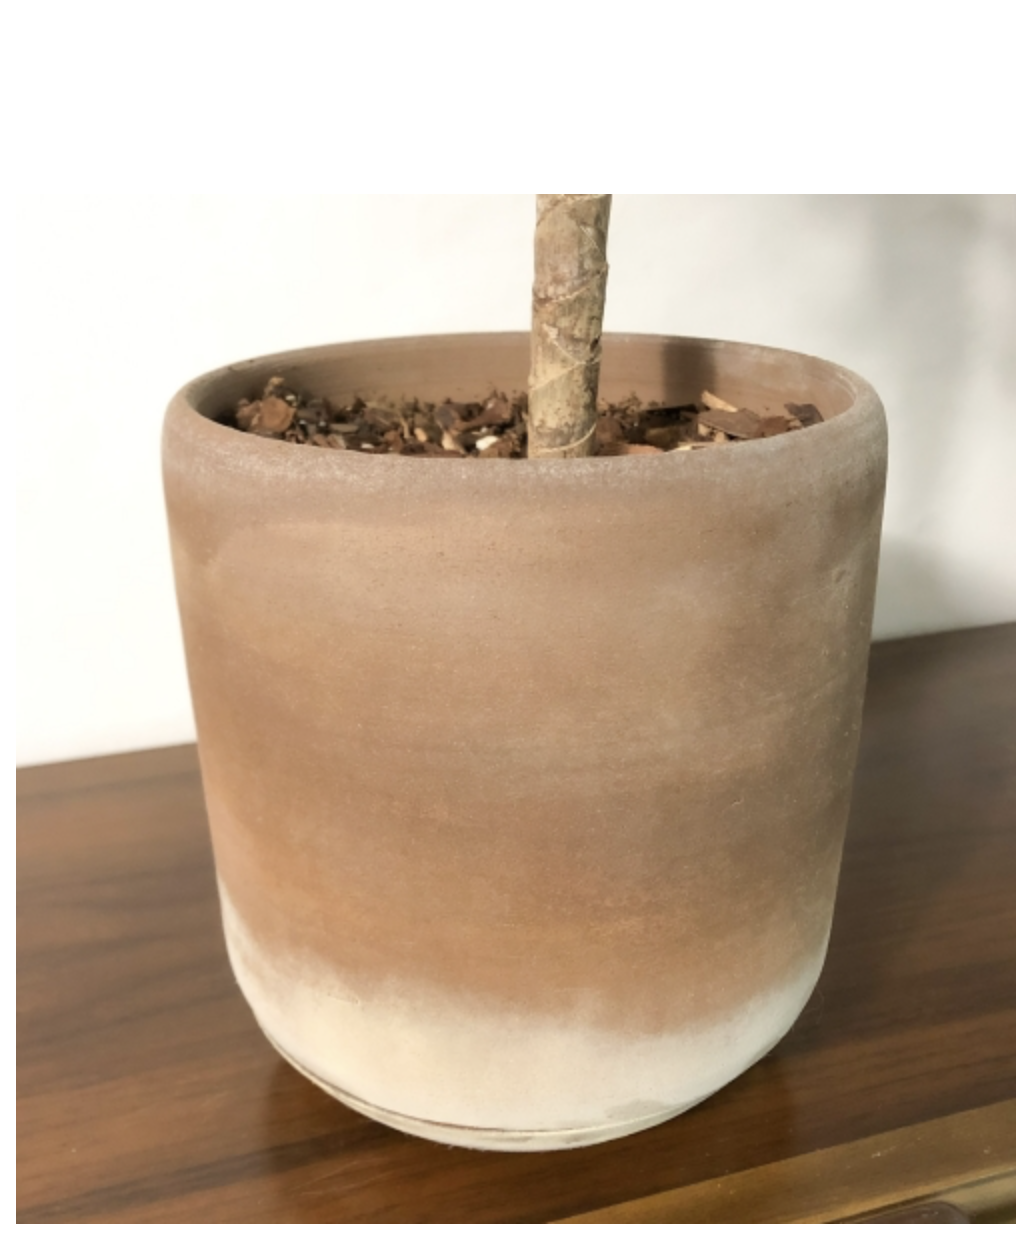 Why does the plant pot turn white ?